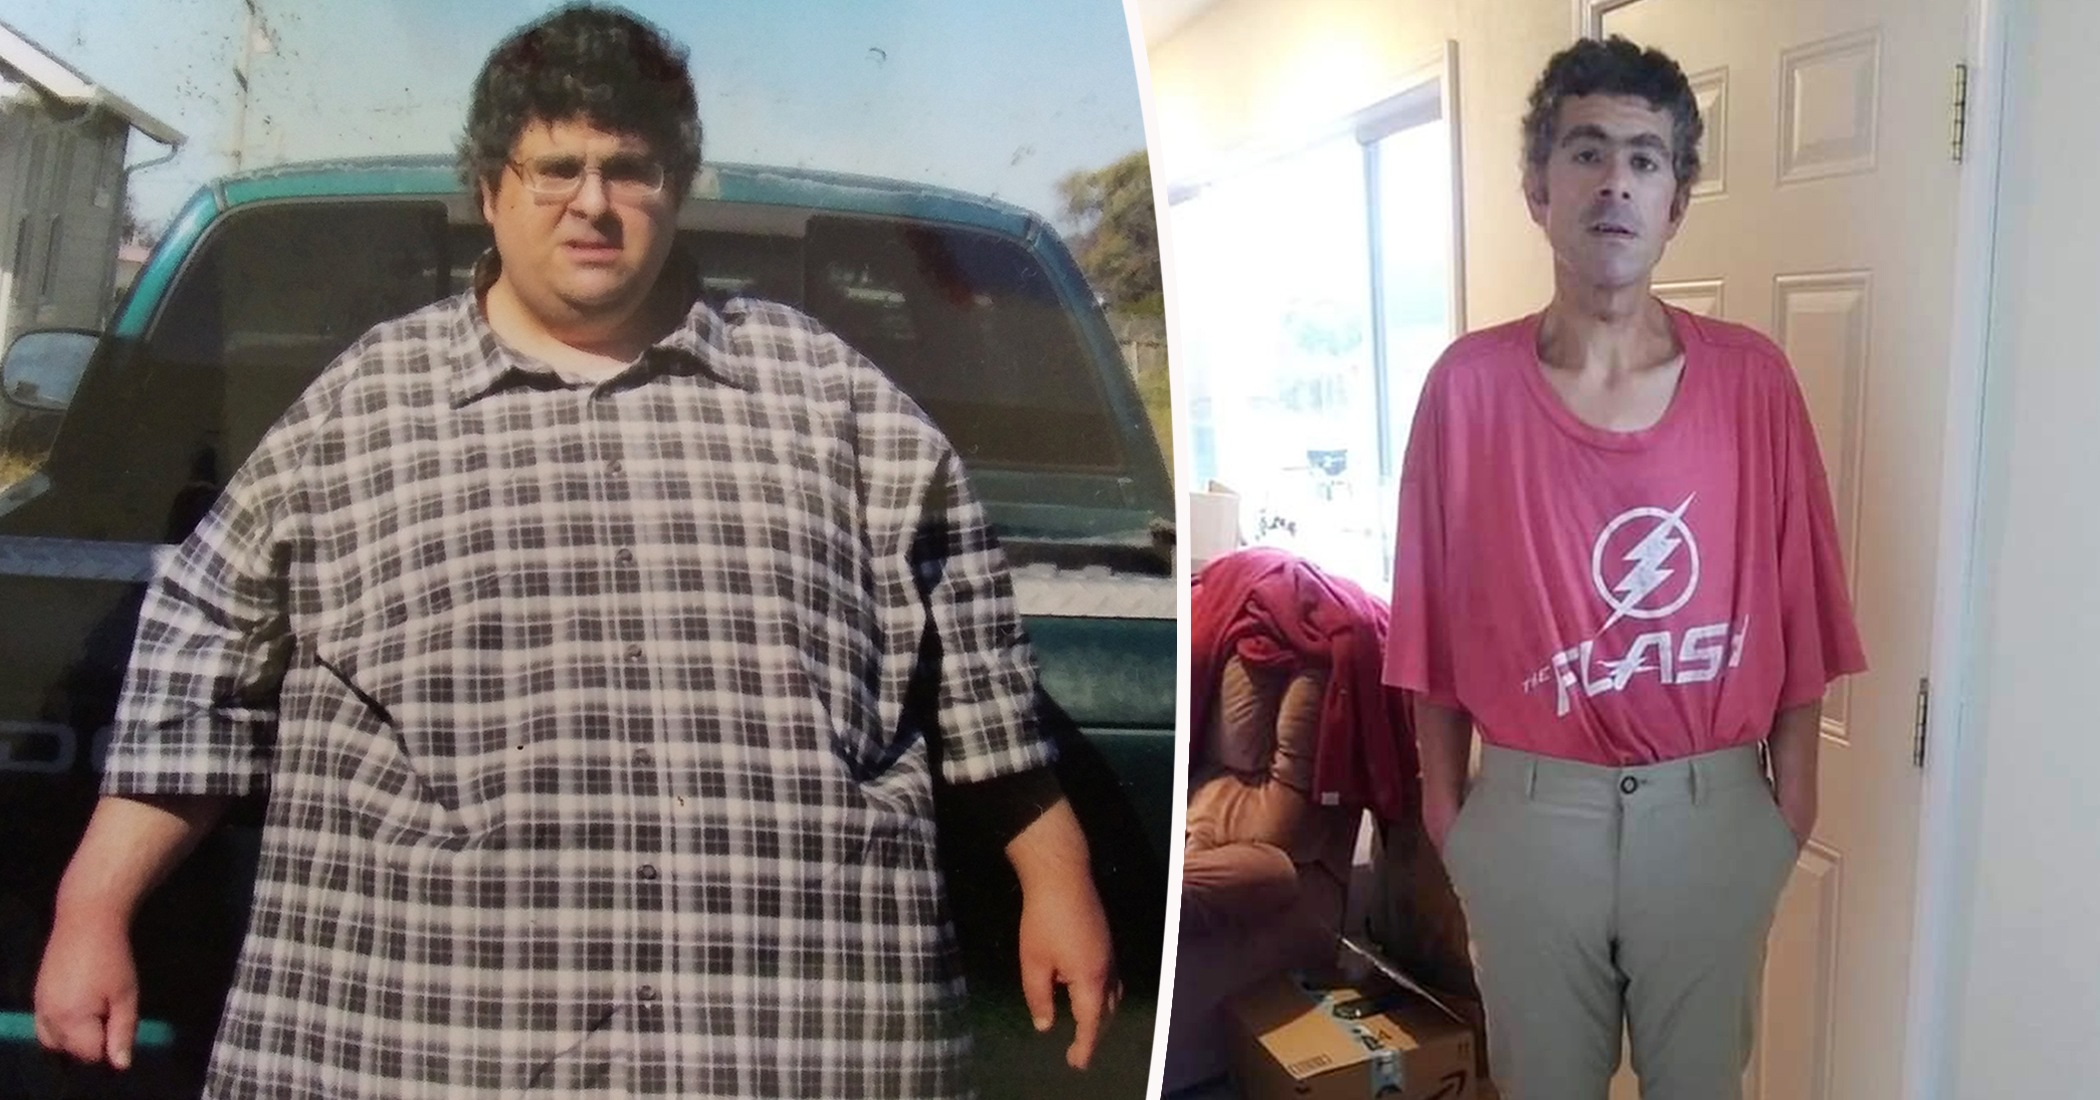 The 460-pound man who spent days in bed loses 61% of body weight through diet and walking